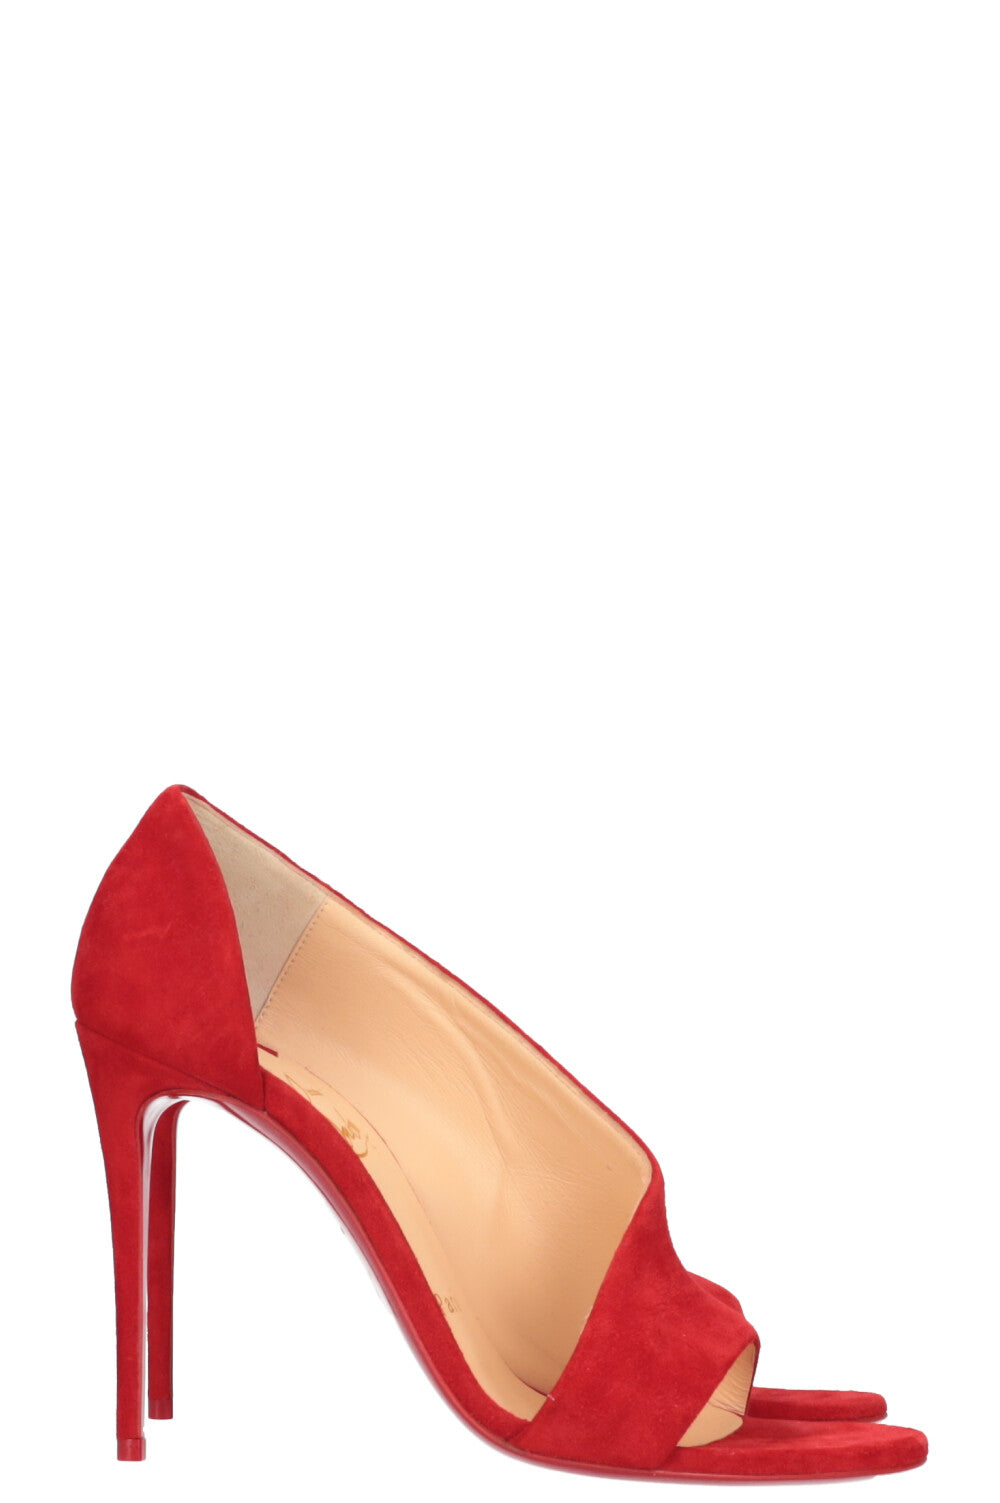 CHRISTIAN LOUBOUTIN Phoebe Pumps Red Suede